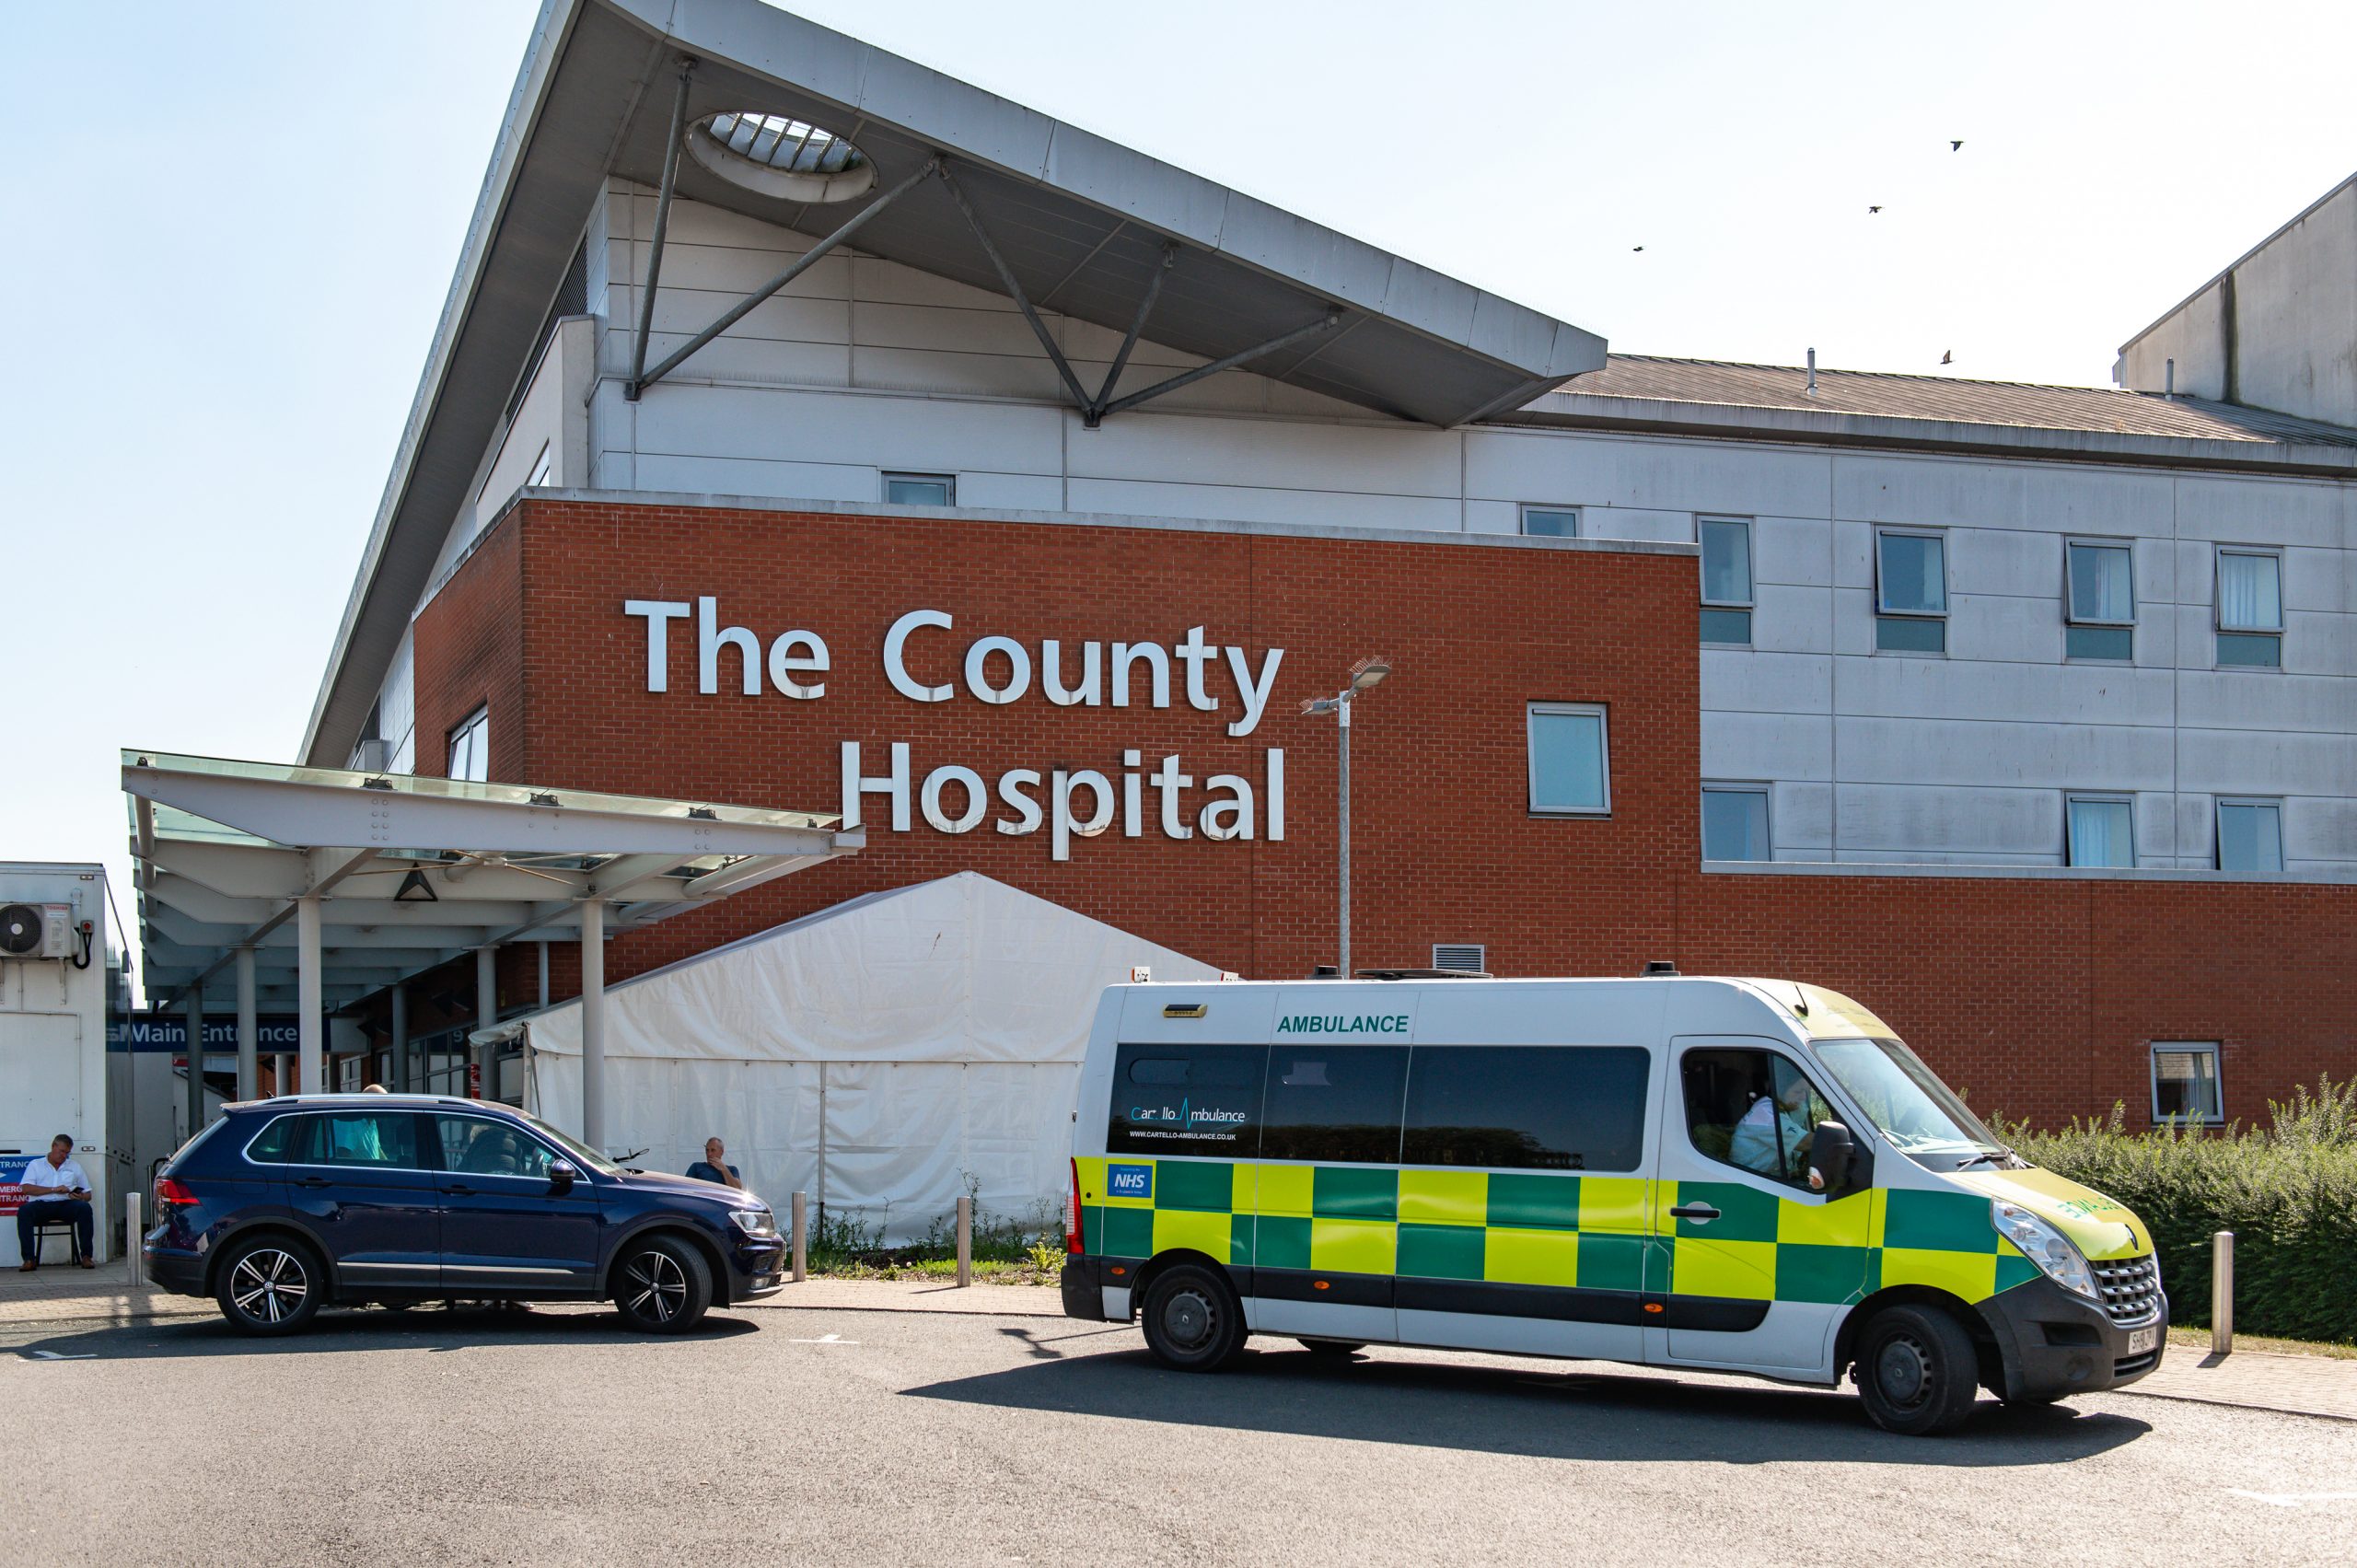 NEWS | Visiting restrictions updated for Wye Valley NHS Trust – FULL DETAILS